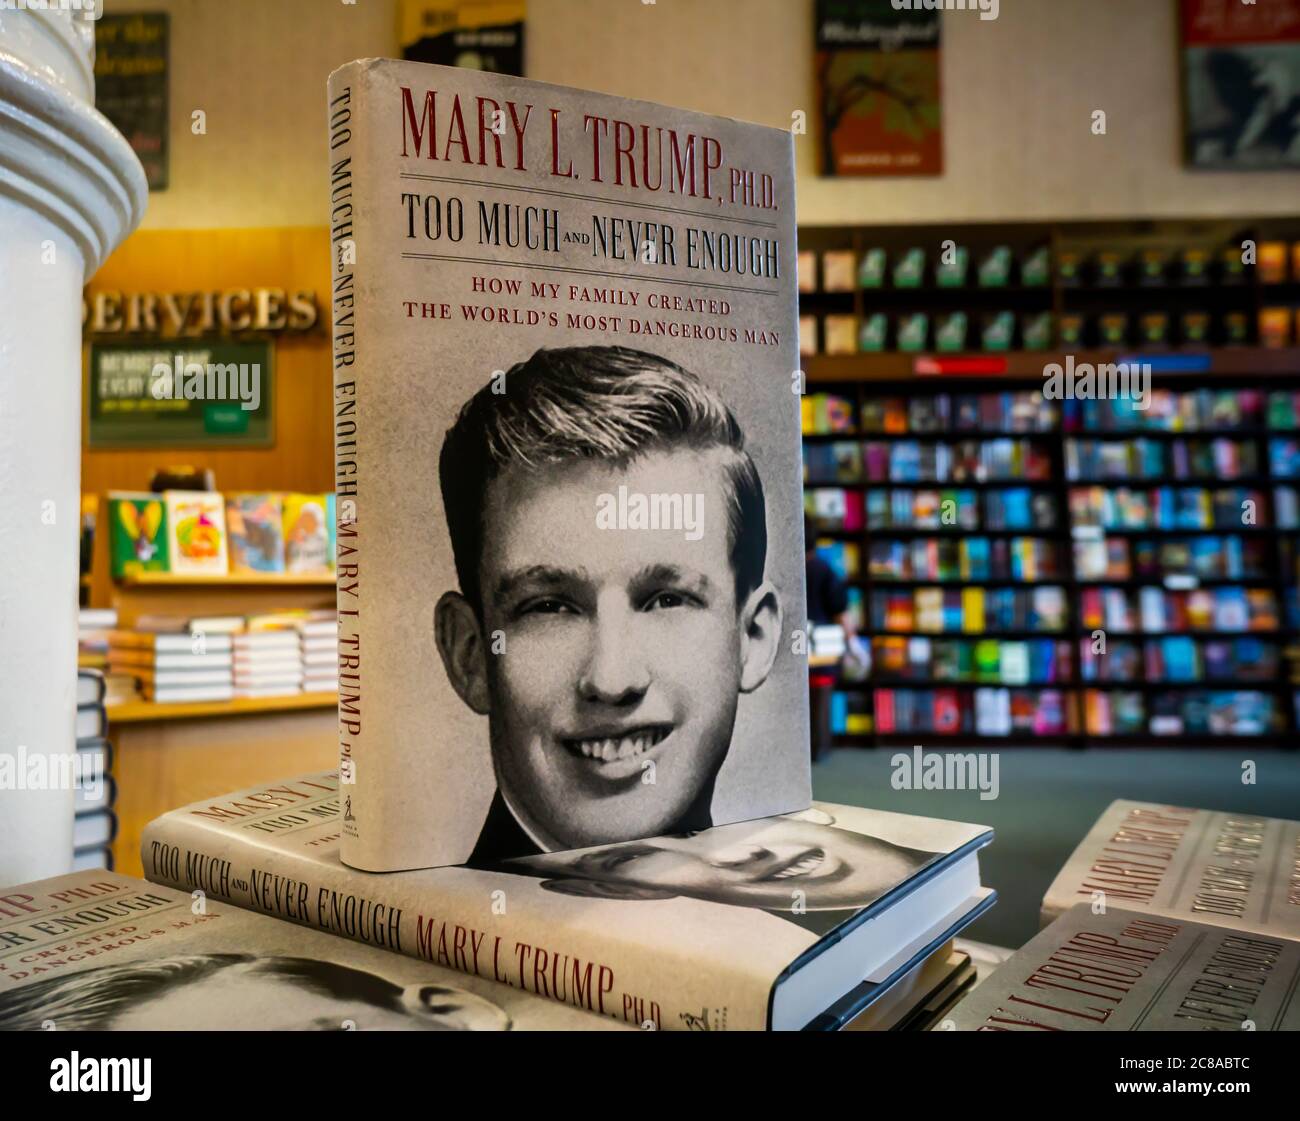 Copies of Mary L. Trump Ph.D.’s book “Too Much and Never Enough: How My Family Created the World’s Most Dangerous Man” in a Barnes & Noble bookstore on the day it goes on sale, Tuesday, July 14, 2020. The courts have rejected an effort by the family to block the publication of the book related to a 2001 confidentiality agreement allowing Simon & Schuster to publish and distribute it.  (© Richard B. Levine) Stock Photo